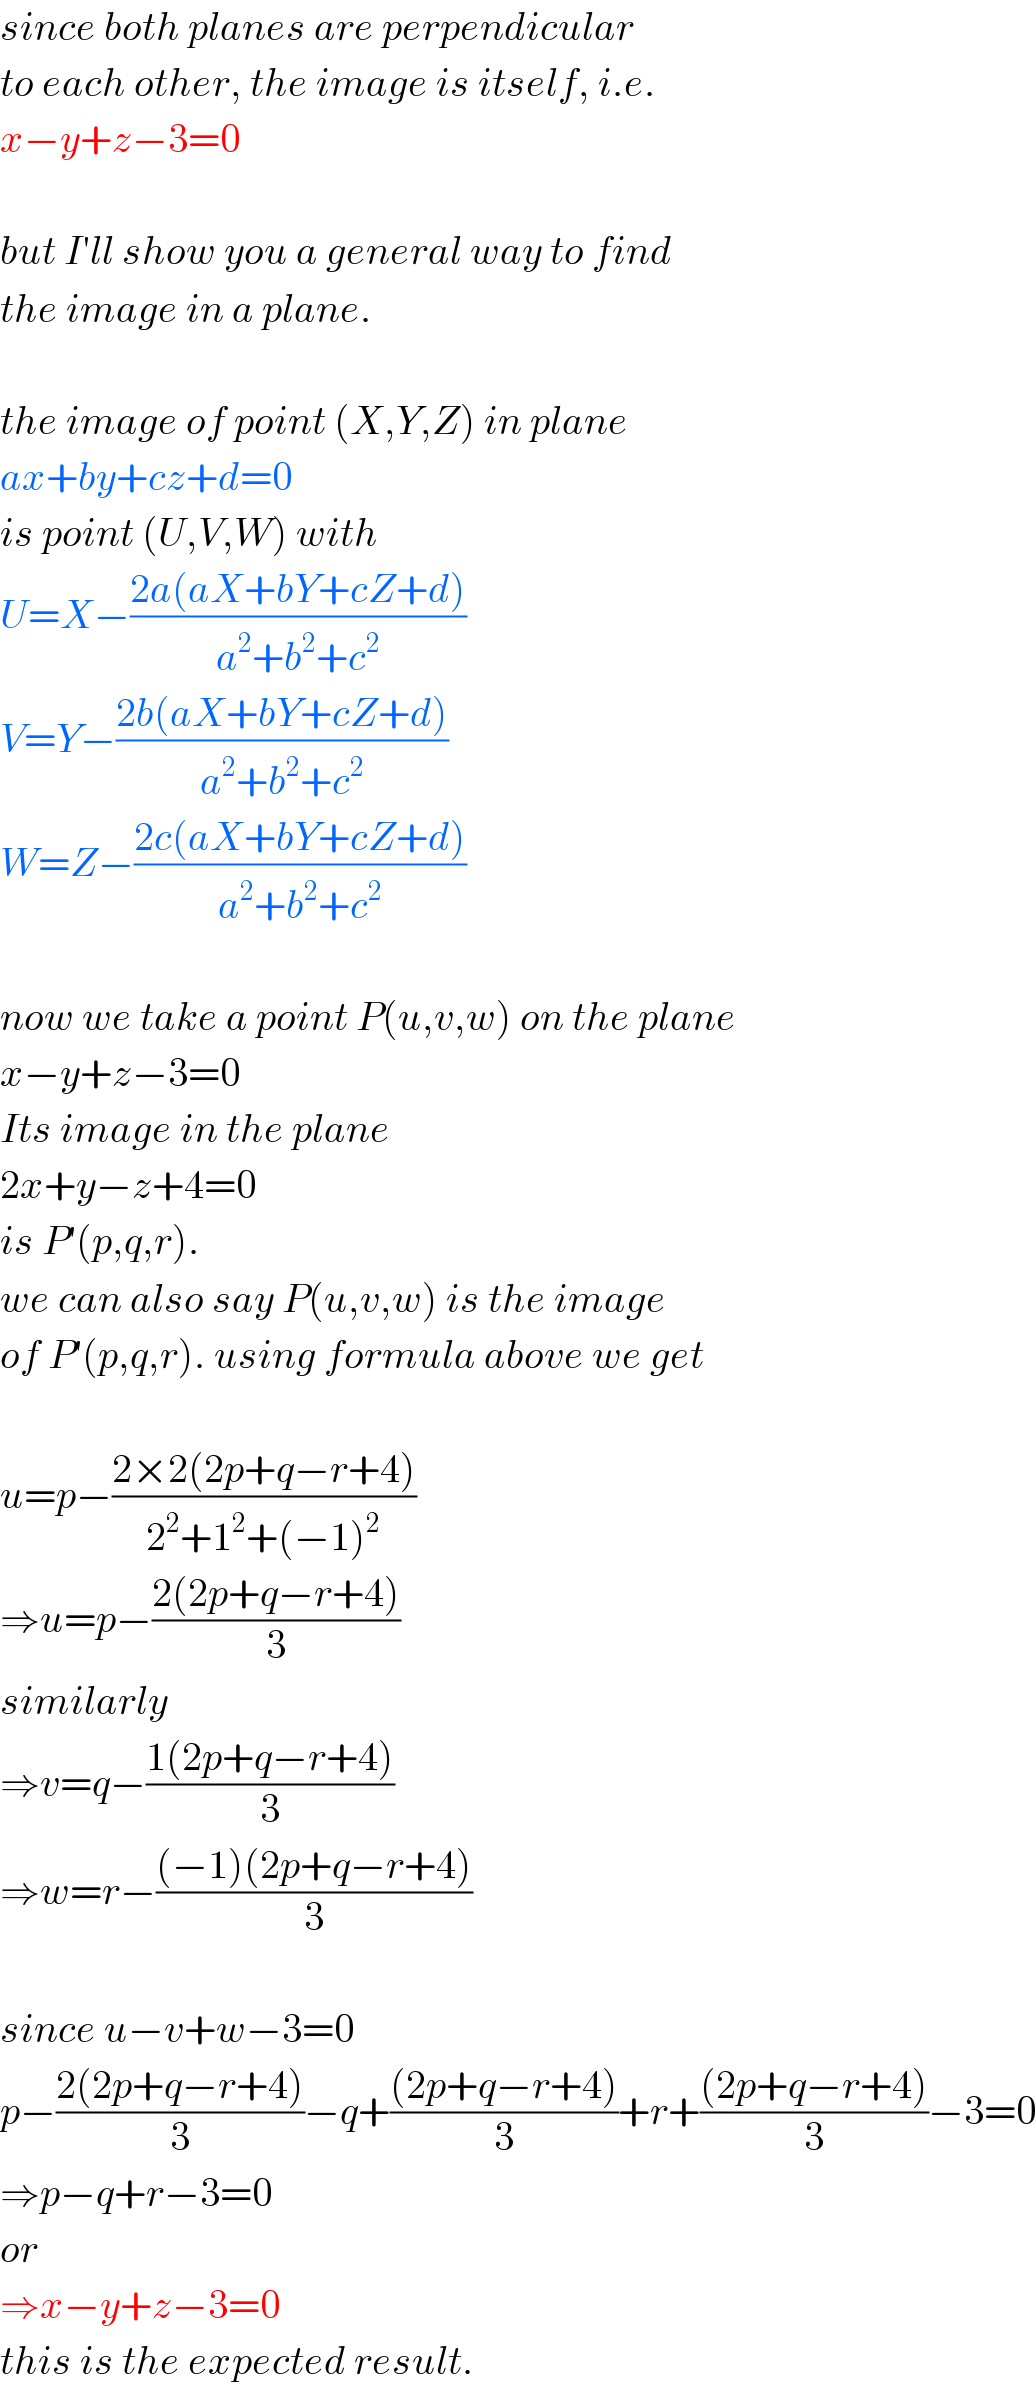 since both planes are perpendicular  to each other, the image is itself, i.e.  x−y+z−3=0    but I′ll show you a general way to find  the image in a plane.    the image of point (X,Y,Z) in plane  ax+by+cz+d=0  is point (U,V,W) with  U=X−((2a(aX+bY+cZ+d))/(a^2 +b^2 +c^2 ))  V=Y−((2b(aX+bY+cZ+d))/(a^2 +b^2 +c^2 ))  W=Z−((2c(aX+bY+cZ+d))/(a^2 +b^2 +c^2 ))    now we take a point P(u,v,w) on the plane  x−y+z−3=0  Its image in the plane  2x+y−z+4=0  is P′(p,q,r).  we can also say P(u,v,w) is the image  of P′(p,q,r). using formula above we get    u=p−((2×2(2p+q−r+4))/(2^2 +1^2 +(−1)^2 ))  ⇒u=p−((2(2p+q−r+4))/3)  similarly  ⇒v=q−((1(2p+q−r+4))/3)  ⇒w=r−(((−1)(2p+q−r+4))/3)    since u−v+w−3=0  p−((2(2p+q−r+4))/3)−q+(((2p+q−r+4))/3)+r+(((2p+q−r+4))/3)−3=0  ⇒p−q+r−3=0  or  ⇒x−y+z−3=0  this is the expected result.  